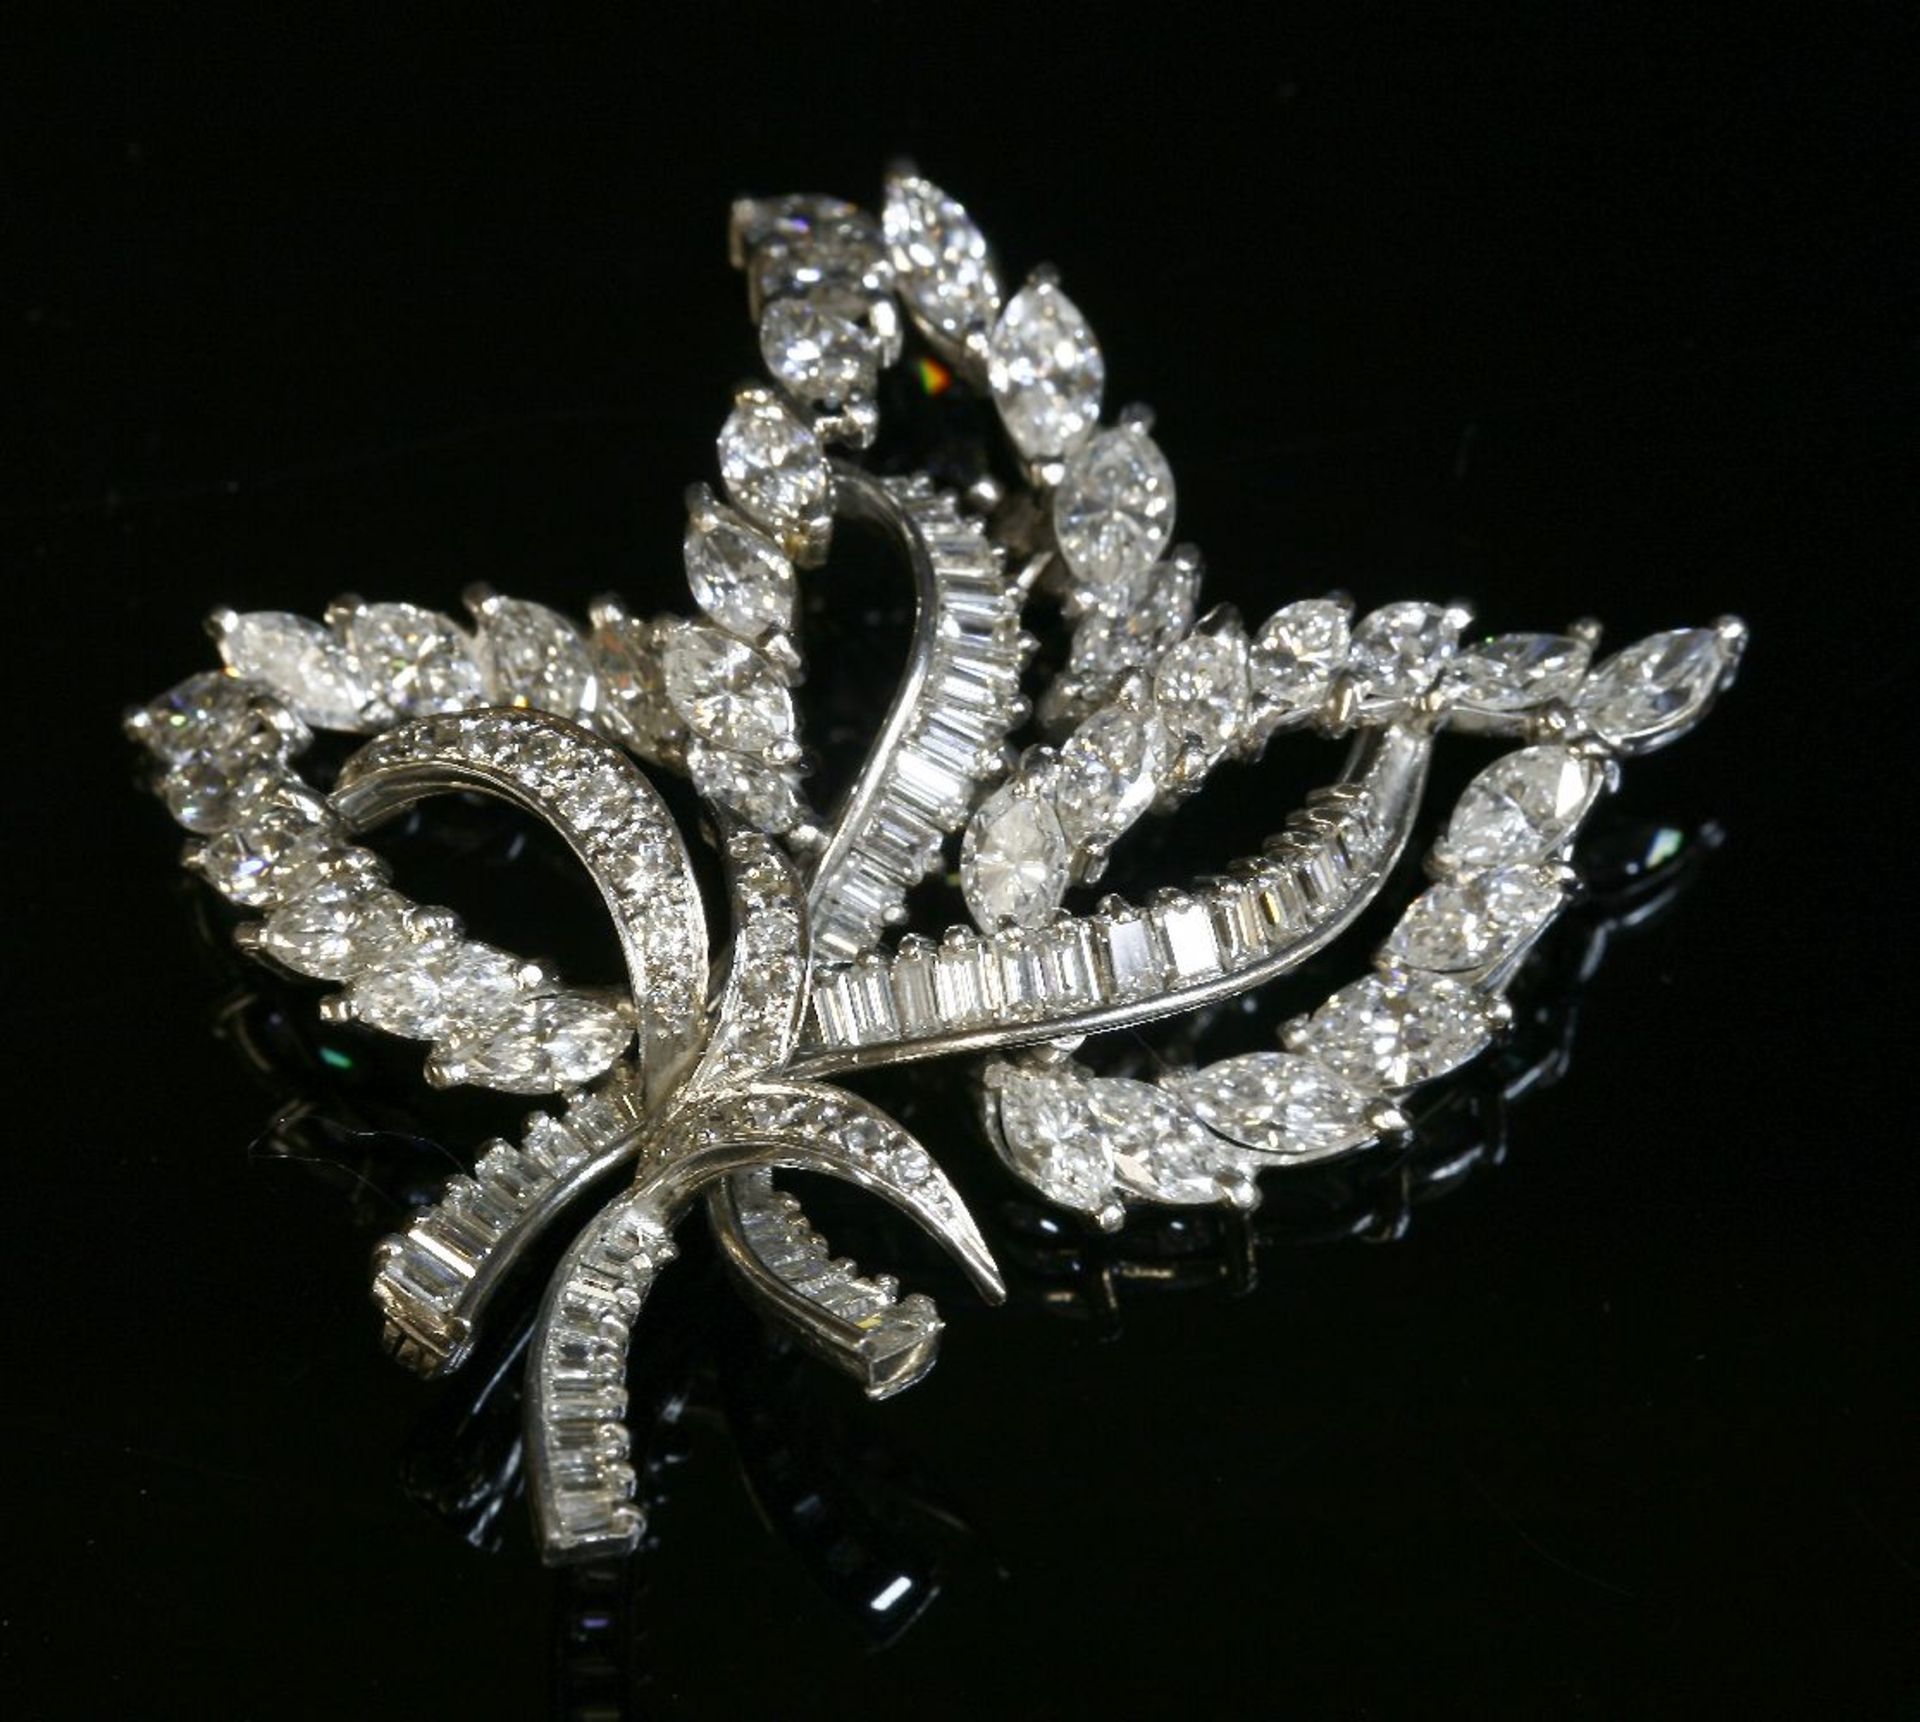 A platinum and diamond set leaf spray brooch, c.1950, with a series of open leaf shapes composed